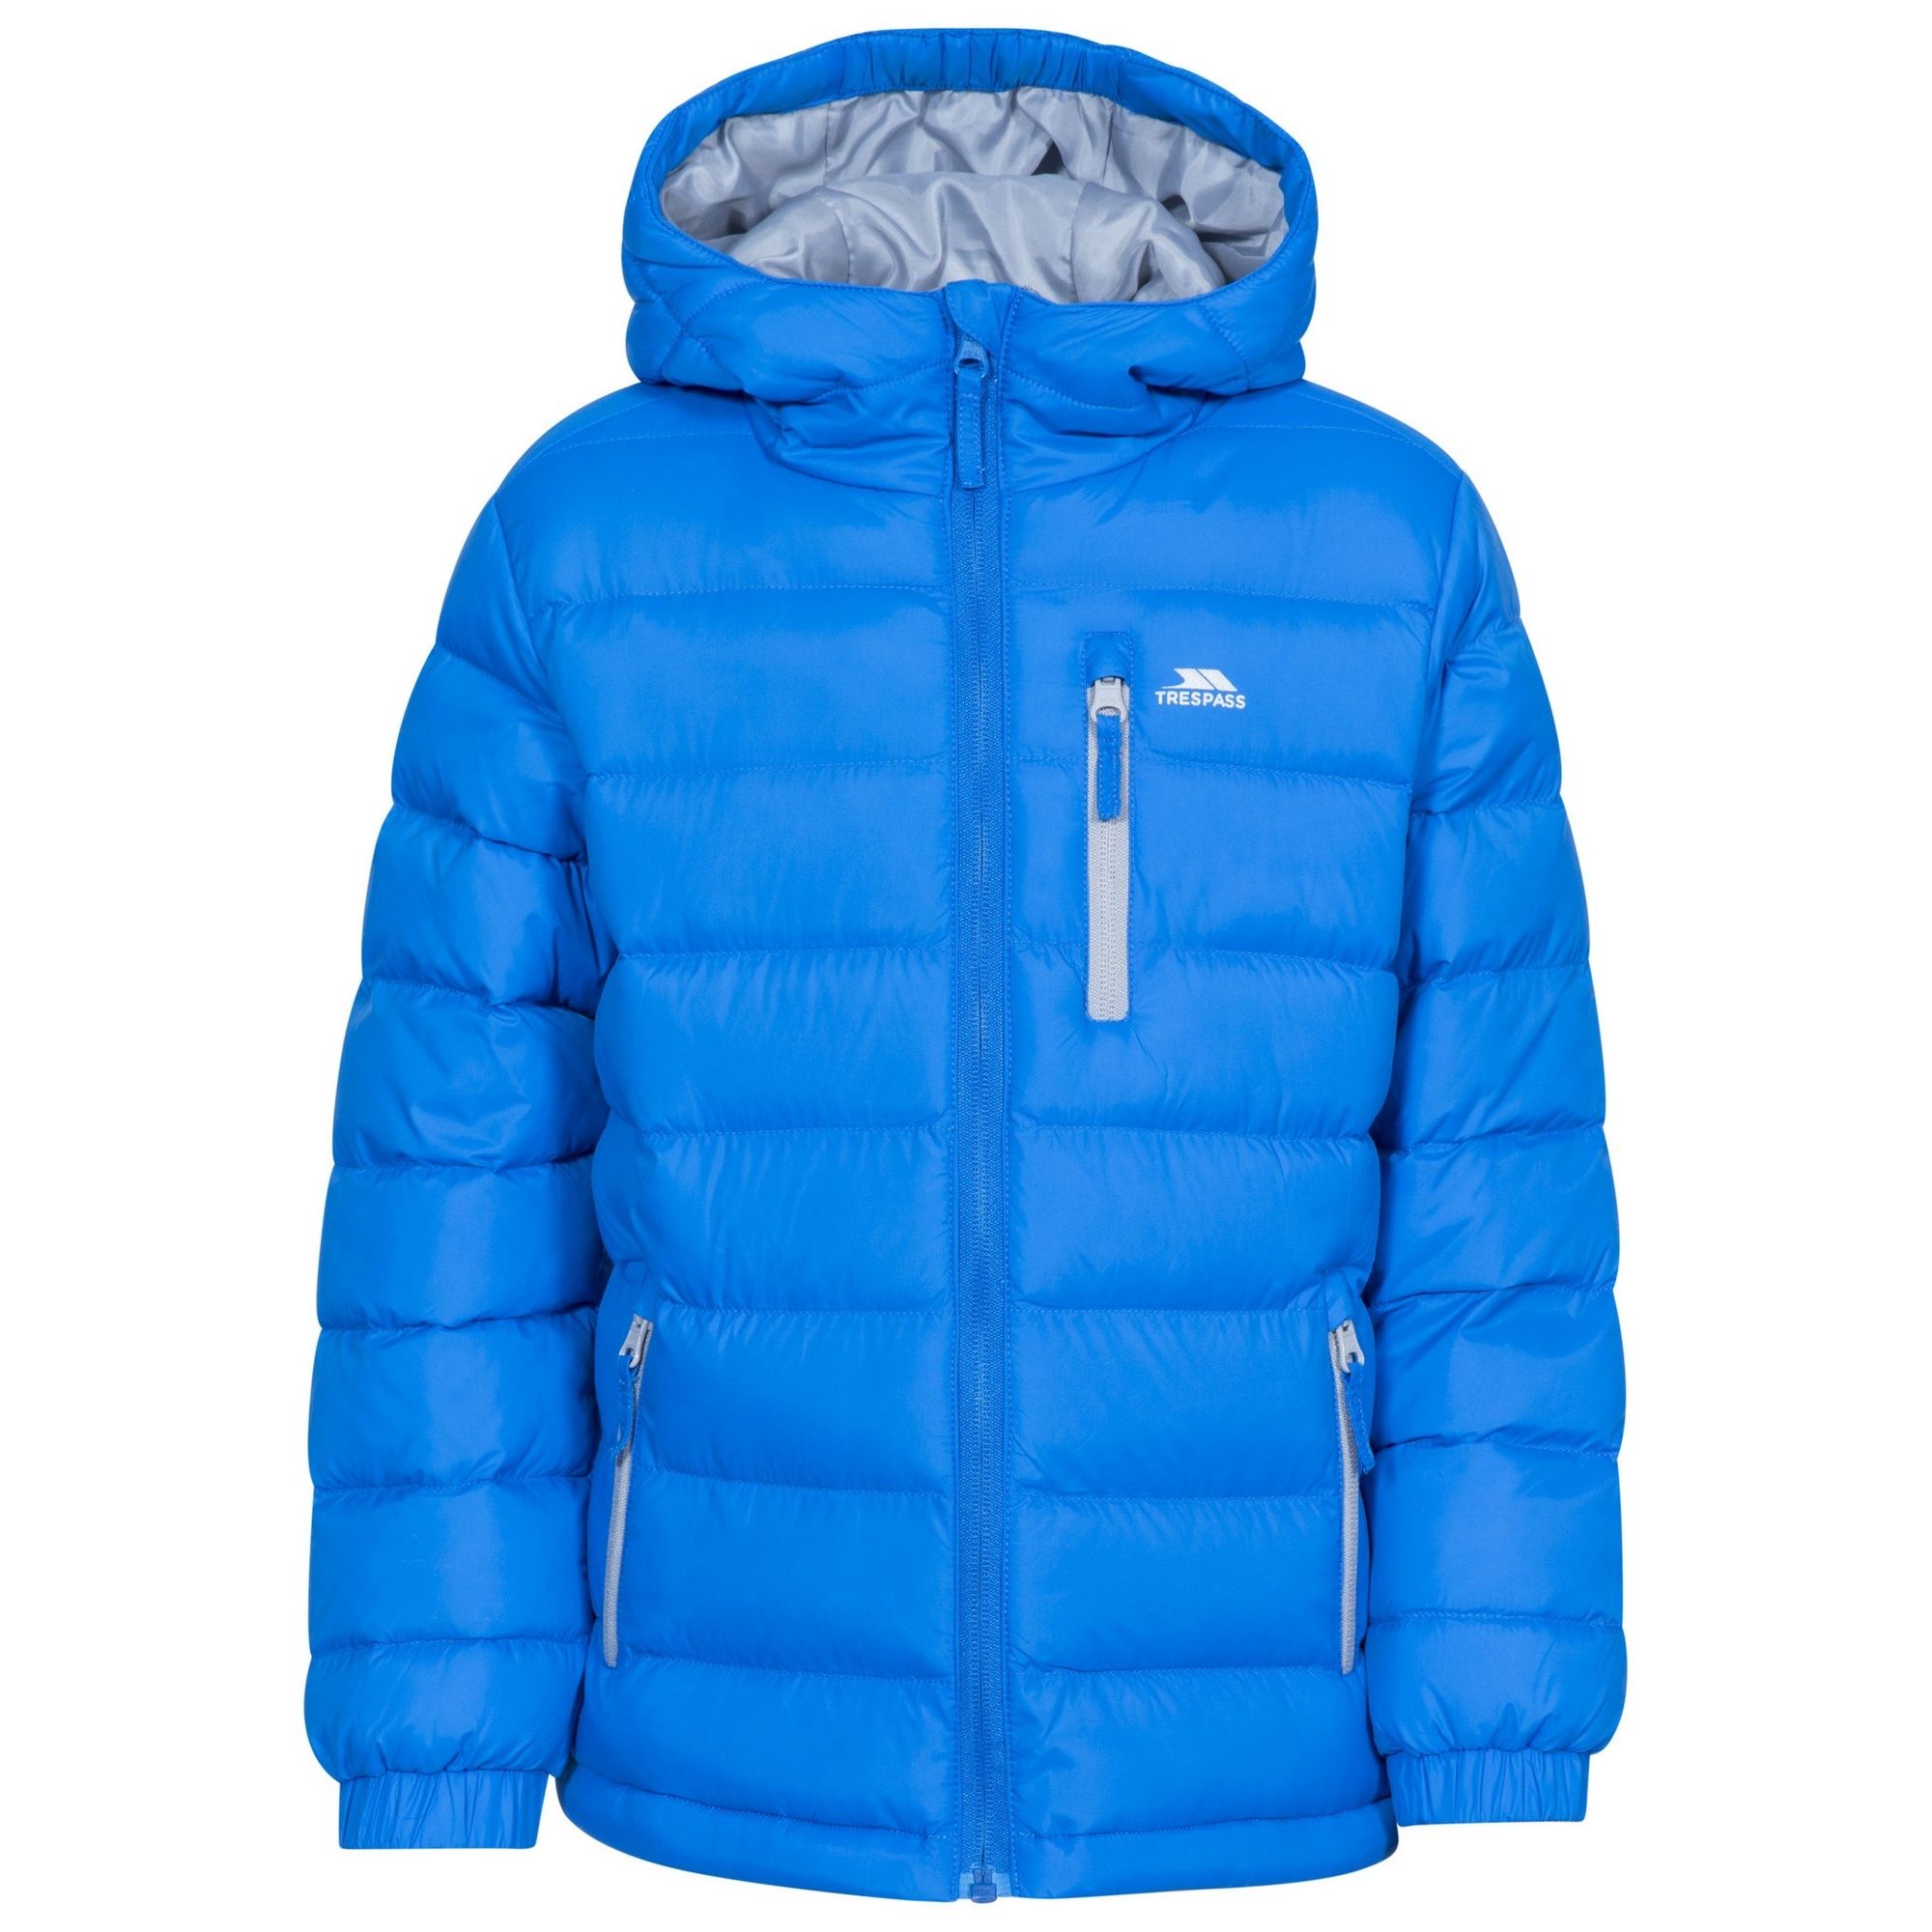 Padded/quilted jacket. Grown on hood. 3 contrast zip pockets. Full cuff elastication. Contrast lining. Water-resistant, wind-resistant. Shell: 100% Polyamide, Lining: 100% Polyester, Filling: 100% Polyester. Trespass Childrens Chest Sizing (approx): 2/3 Years - 21in/53cm, 3/4 Years - 22in/56cm, 5/6 Years - 24in/61cm, 7/8 Years - 26in/66cm, 9/10 Years - 28in/71cm, 11/12 Years - 31in/79cm.